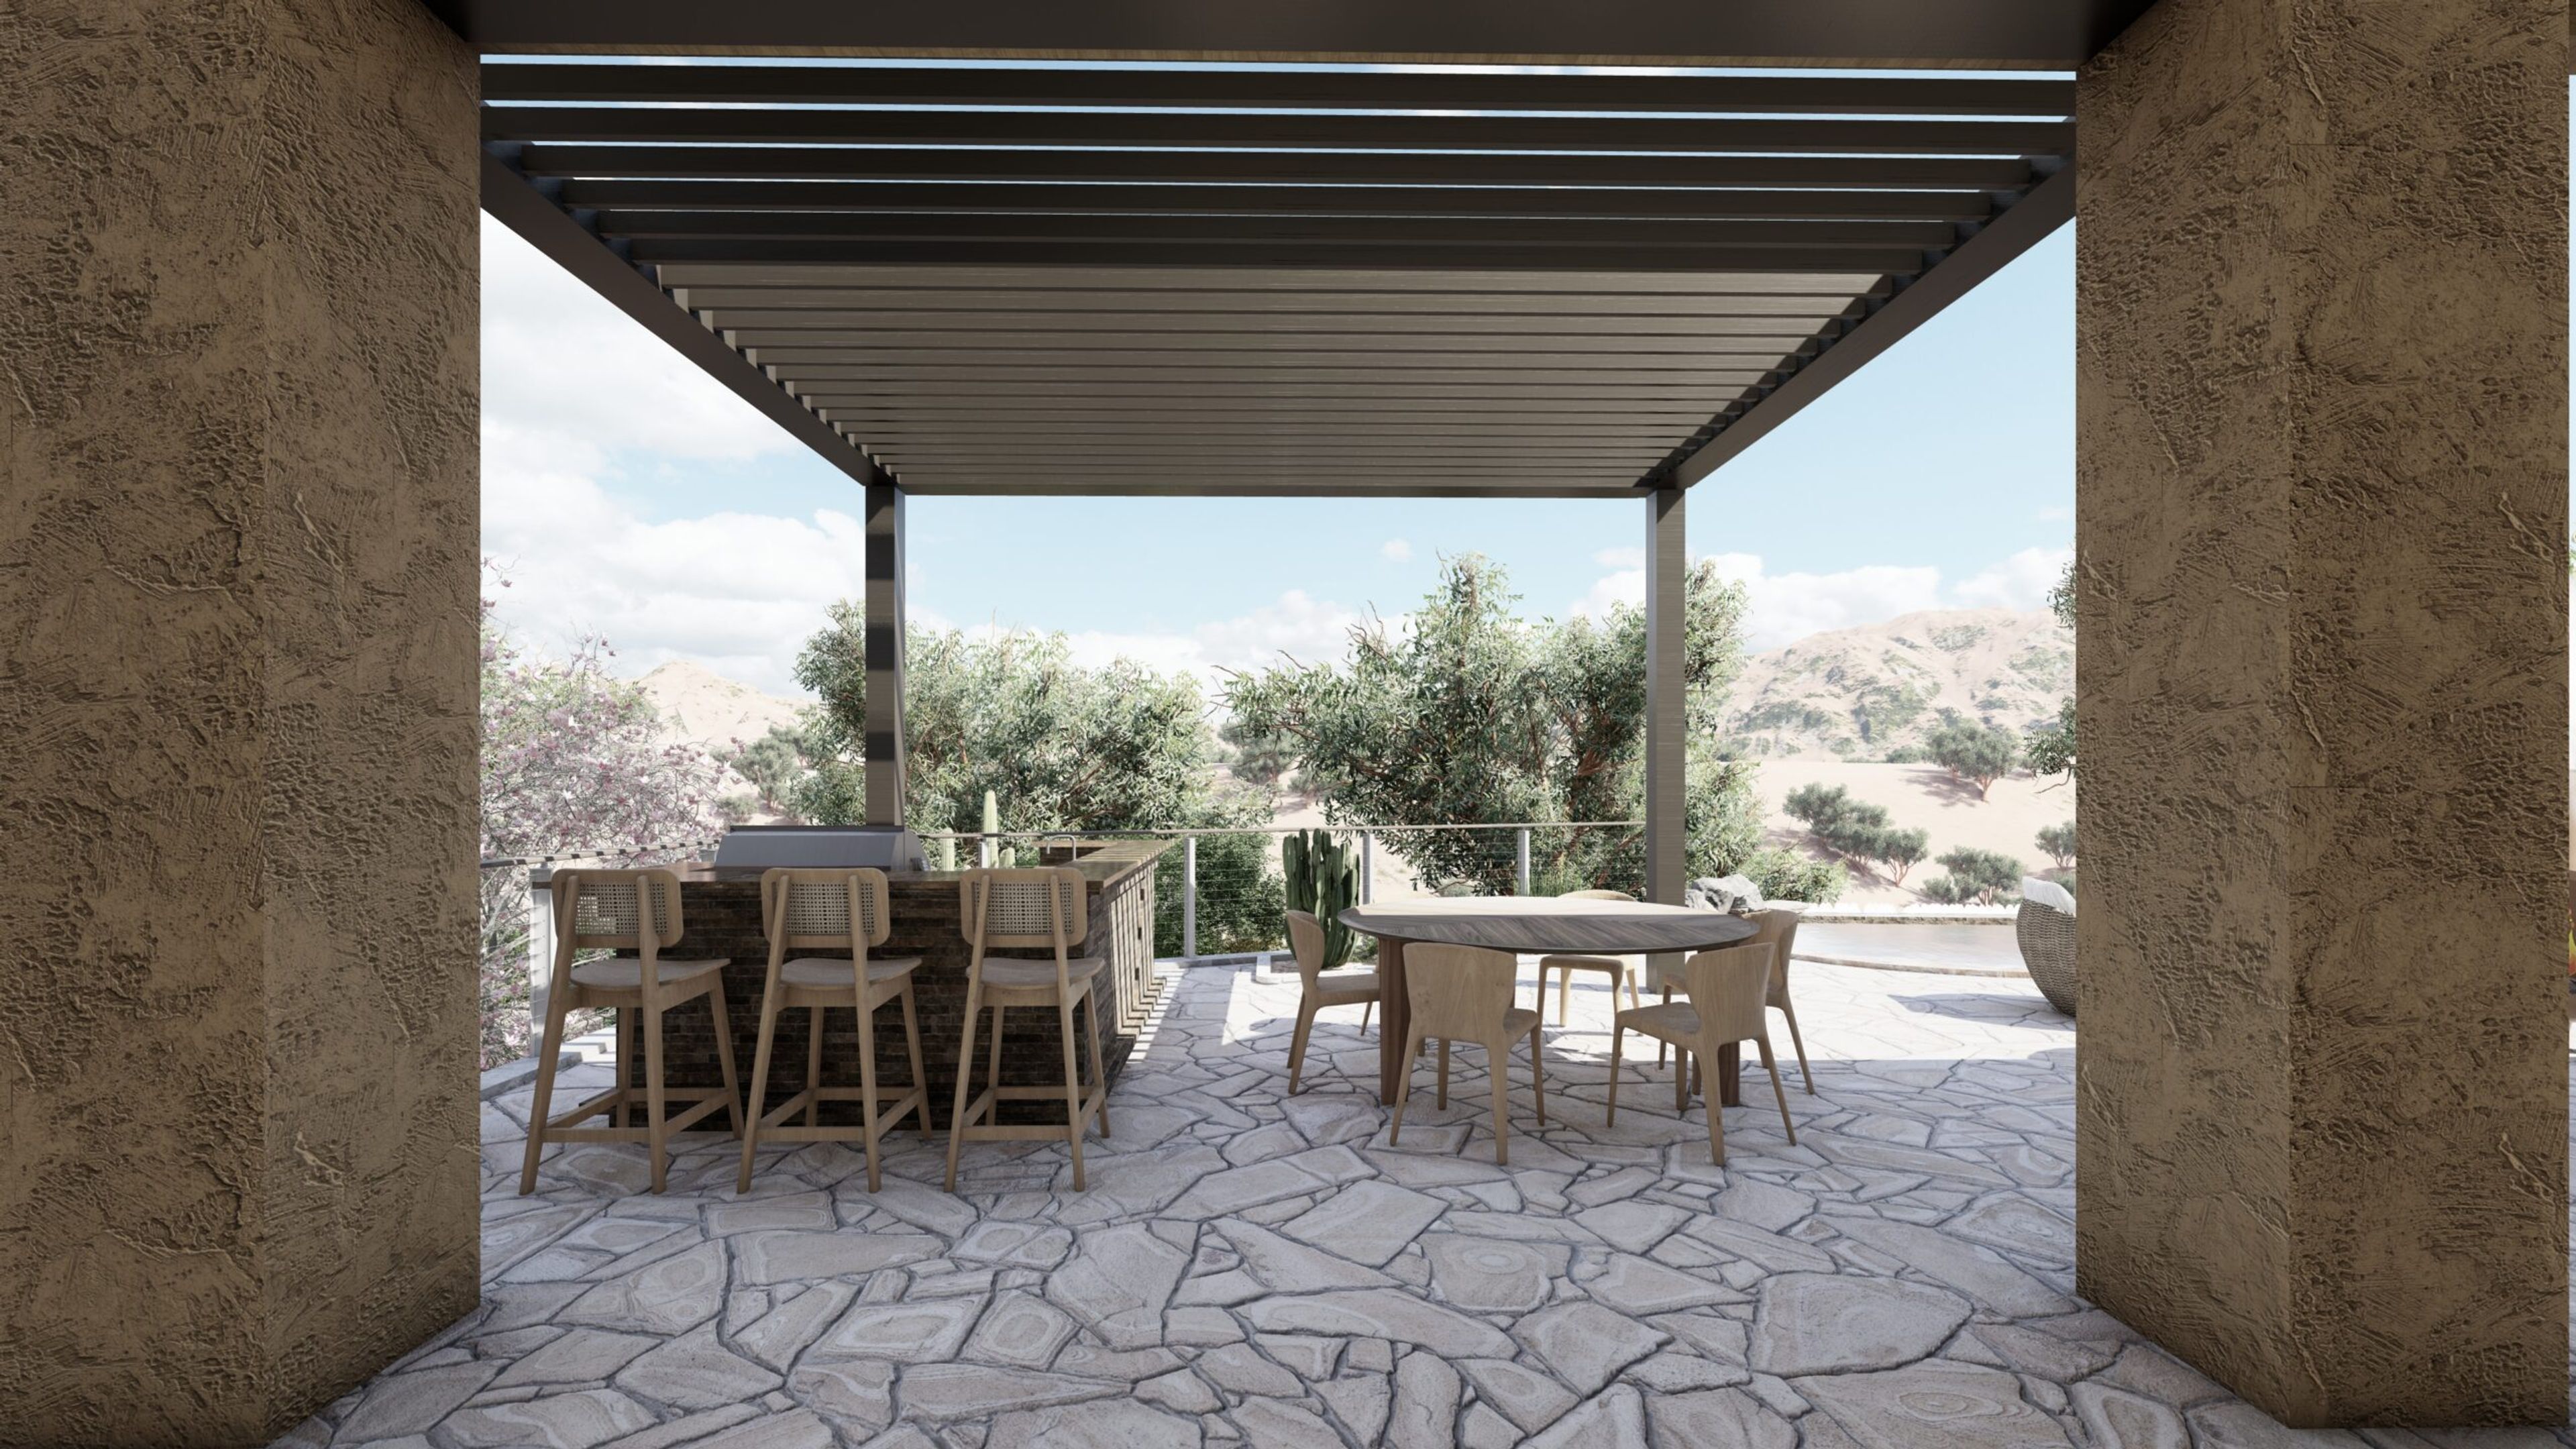 A shaded patio area in an Arizona plan